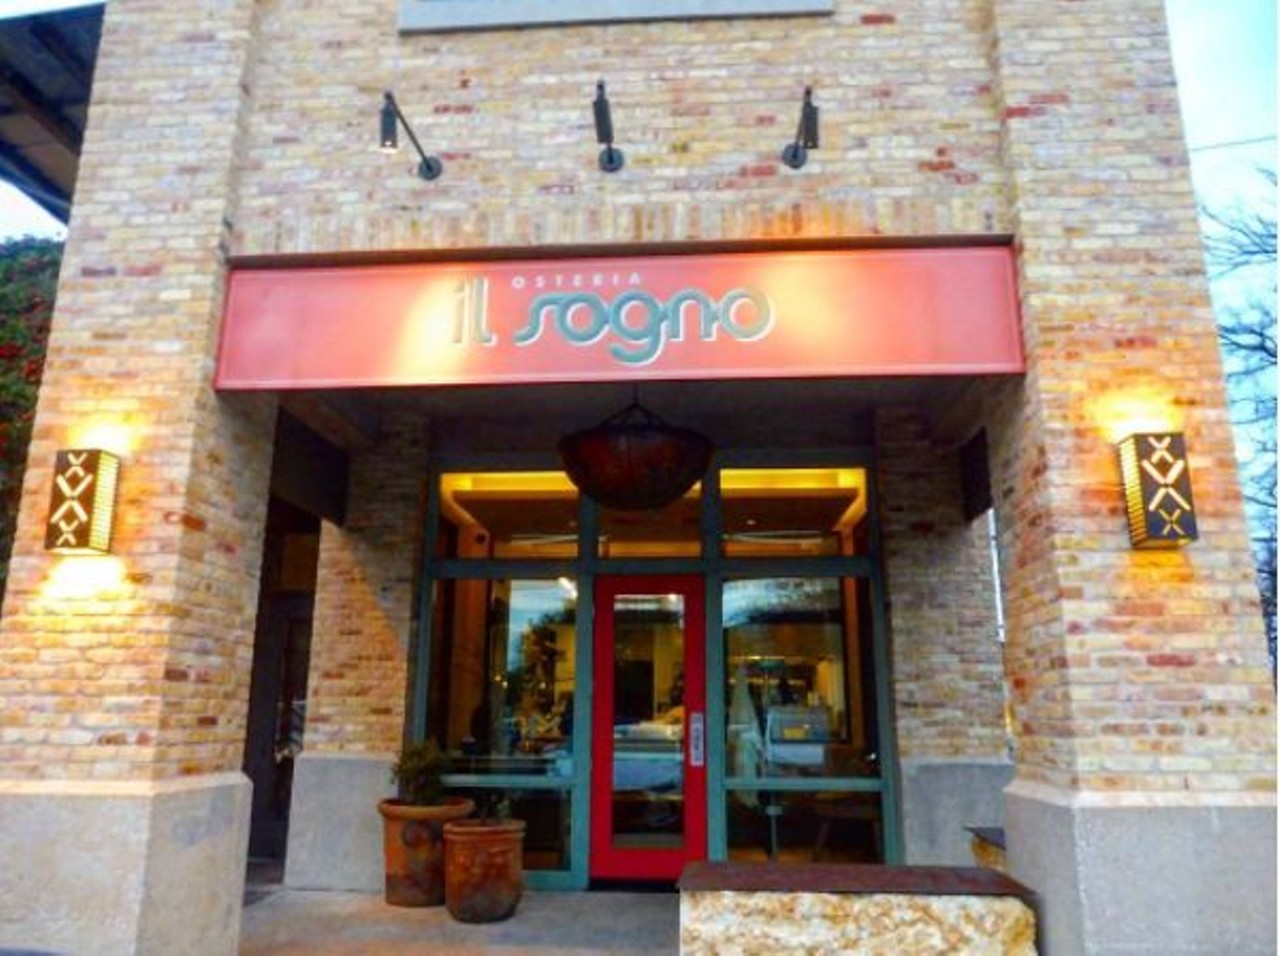 Il Sogno
200 E Grayson St #100, (210) 223-3900
Il Sogno is everything you could want out of an Italian restaurant &#151; and more.
Photo via Instagram, leilatinasian_atx